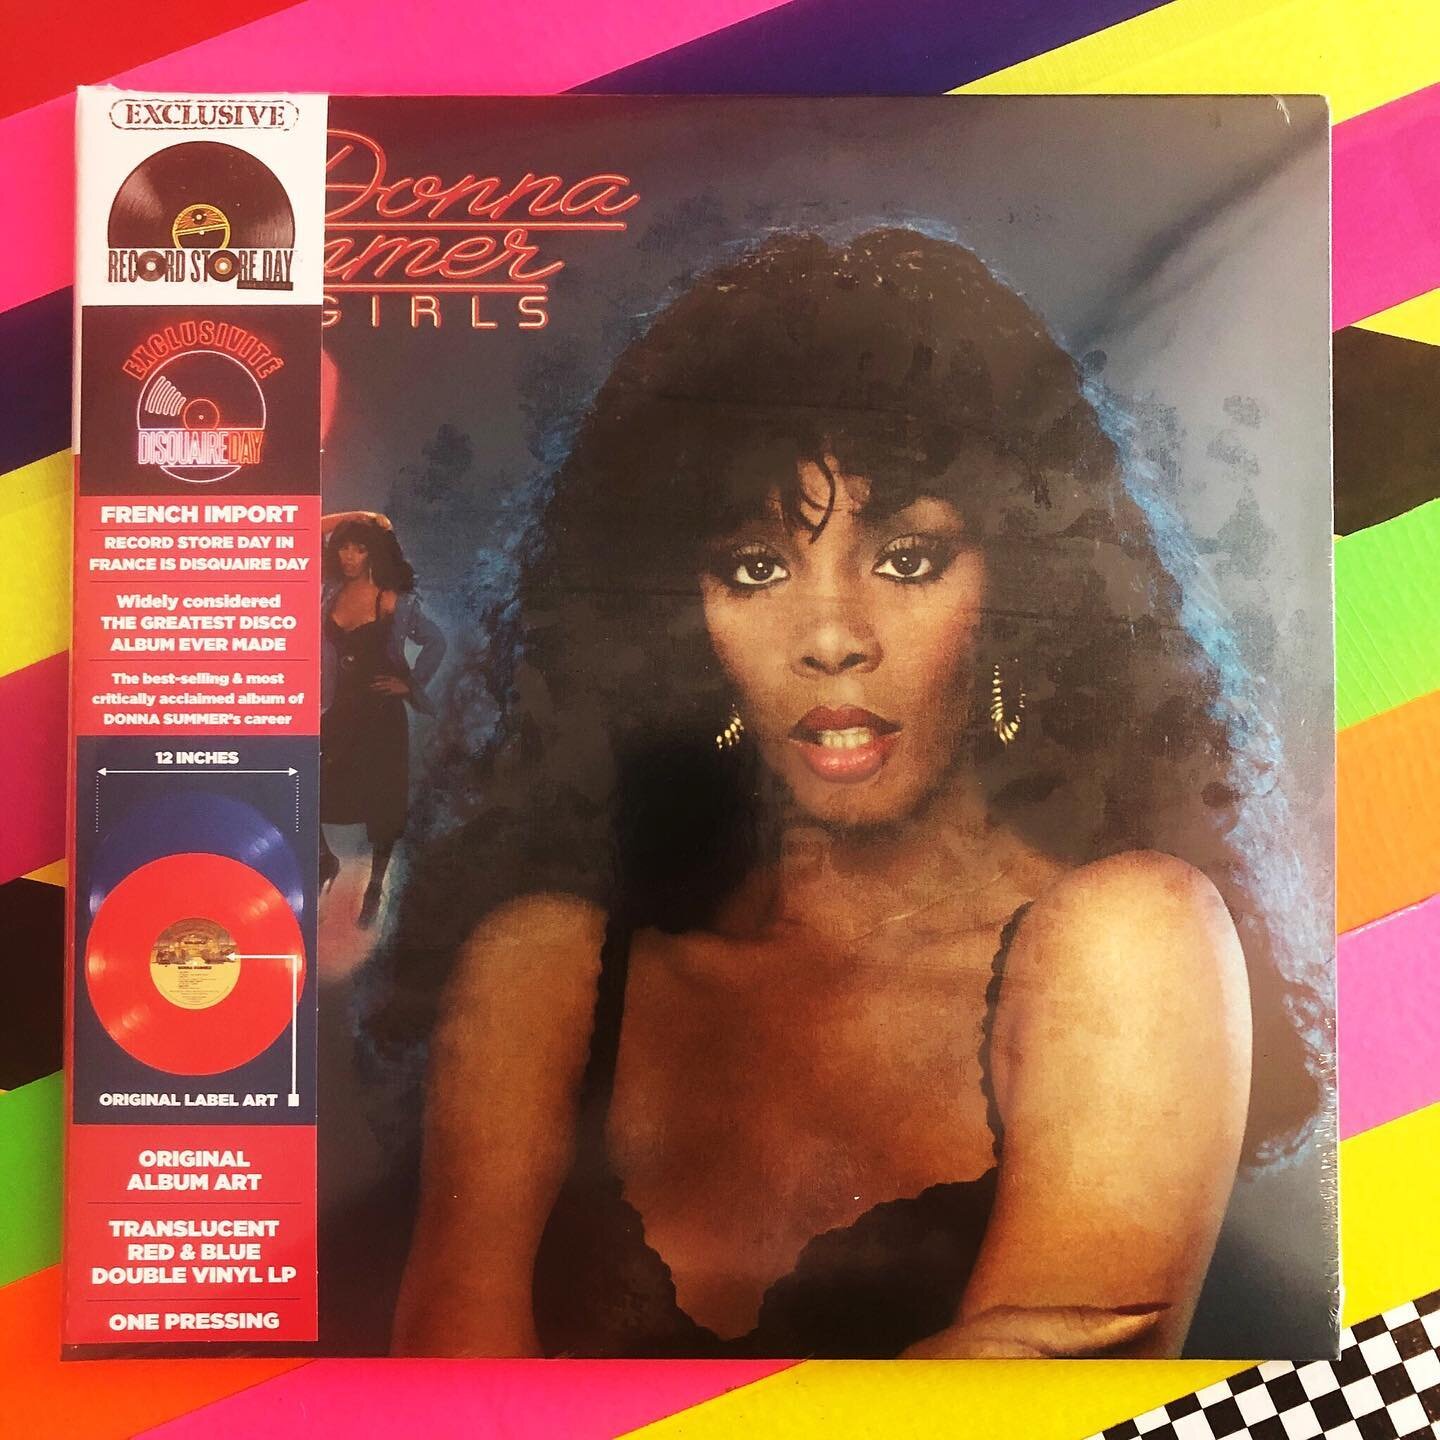 Disquaire Day leftovers&hellip; Donna is waiting&hellip;
.
Les restes du Disquaire Day&hellip; Donna attend&hellip;
 .
.
#disquaireday #donnasummer #badgirls #disco #giorgiomoroder #rarevinyl #dance #theflipsidevinyl #disquaire #recordstore #france #